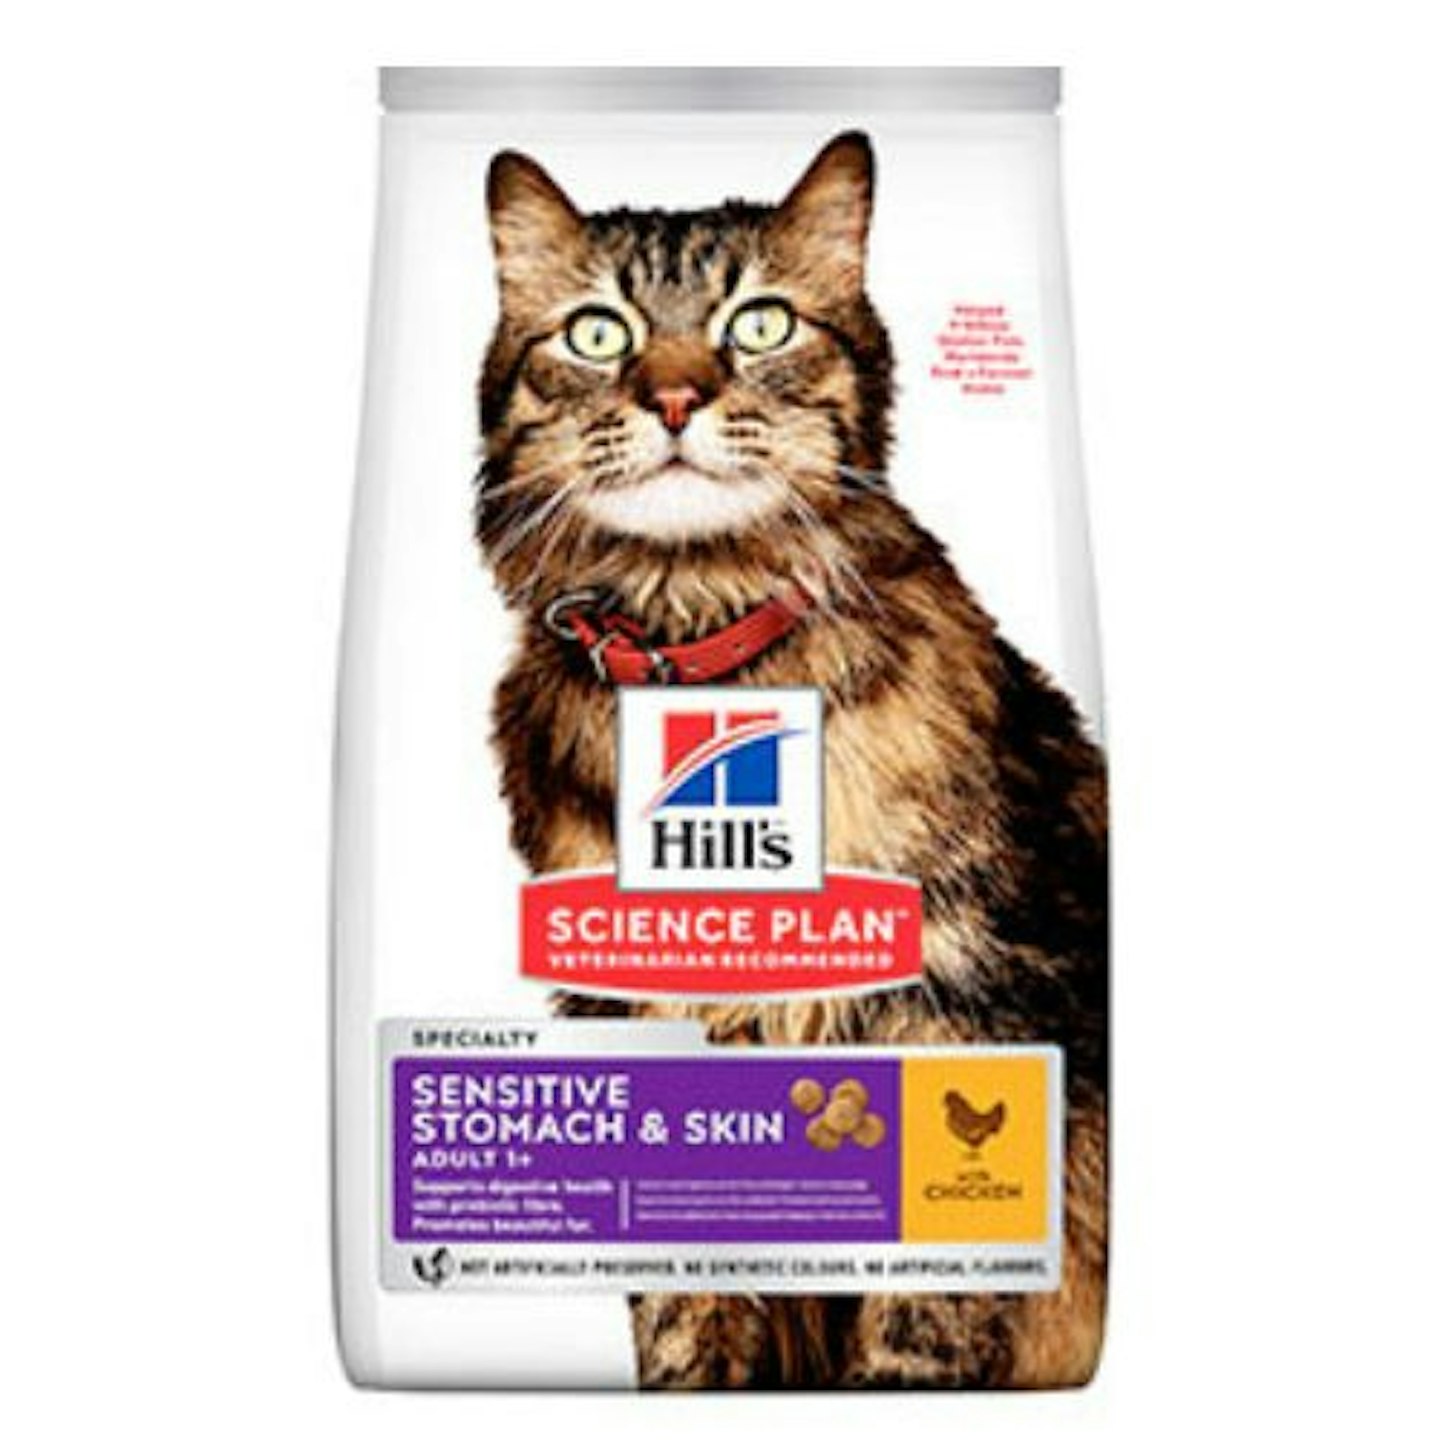 Hill's Science Plan Sensitive Stomach and Skin Dry Cat Food